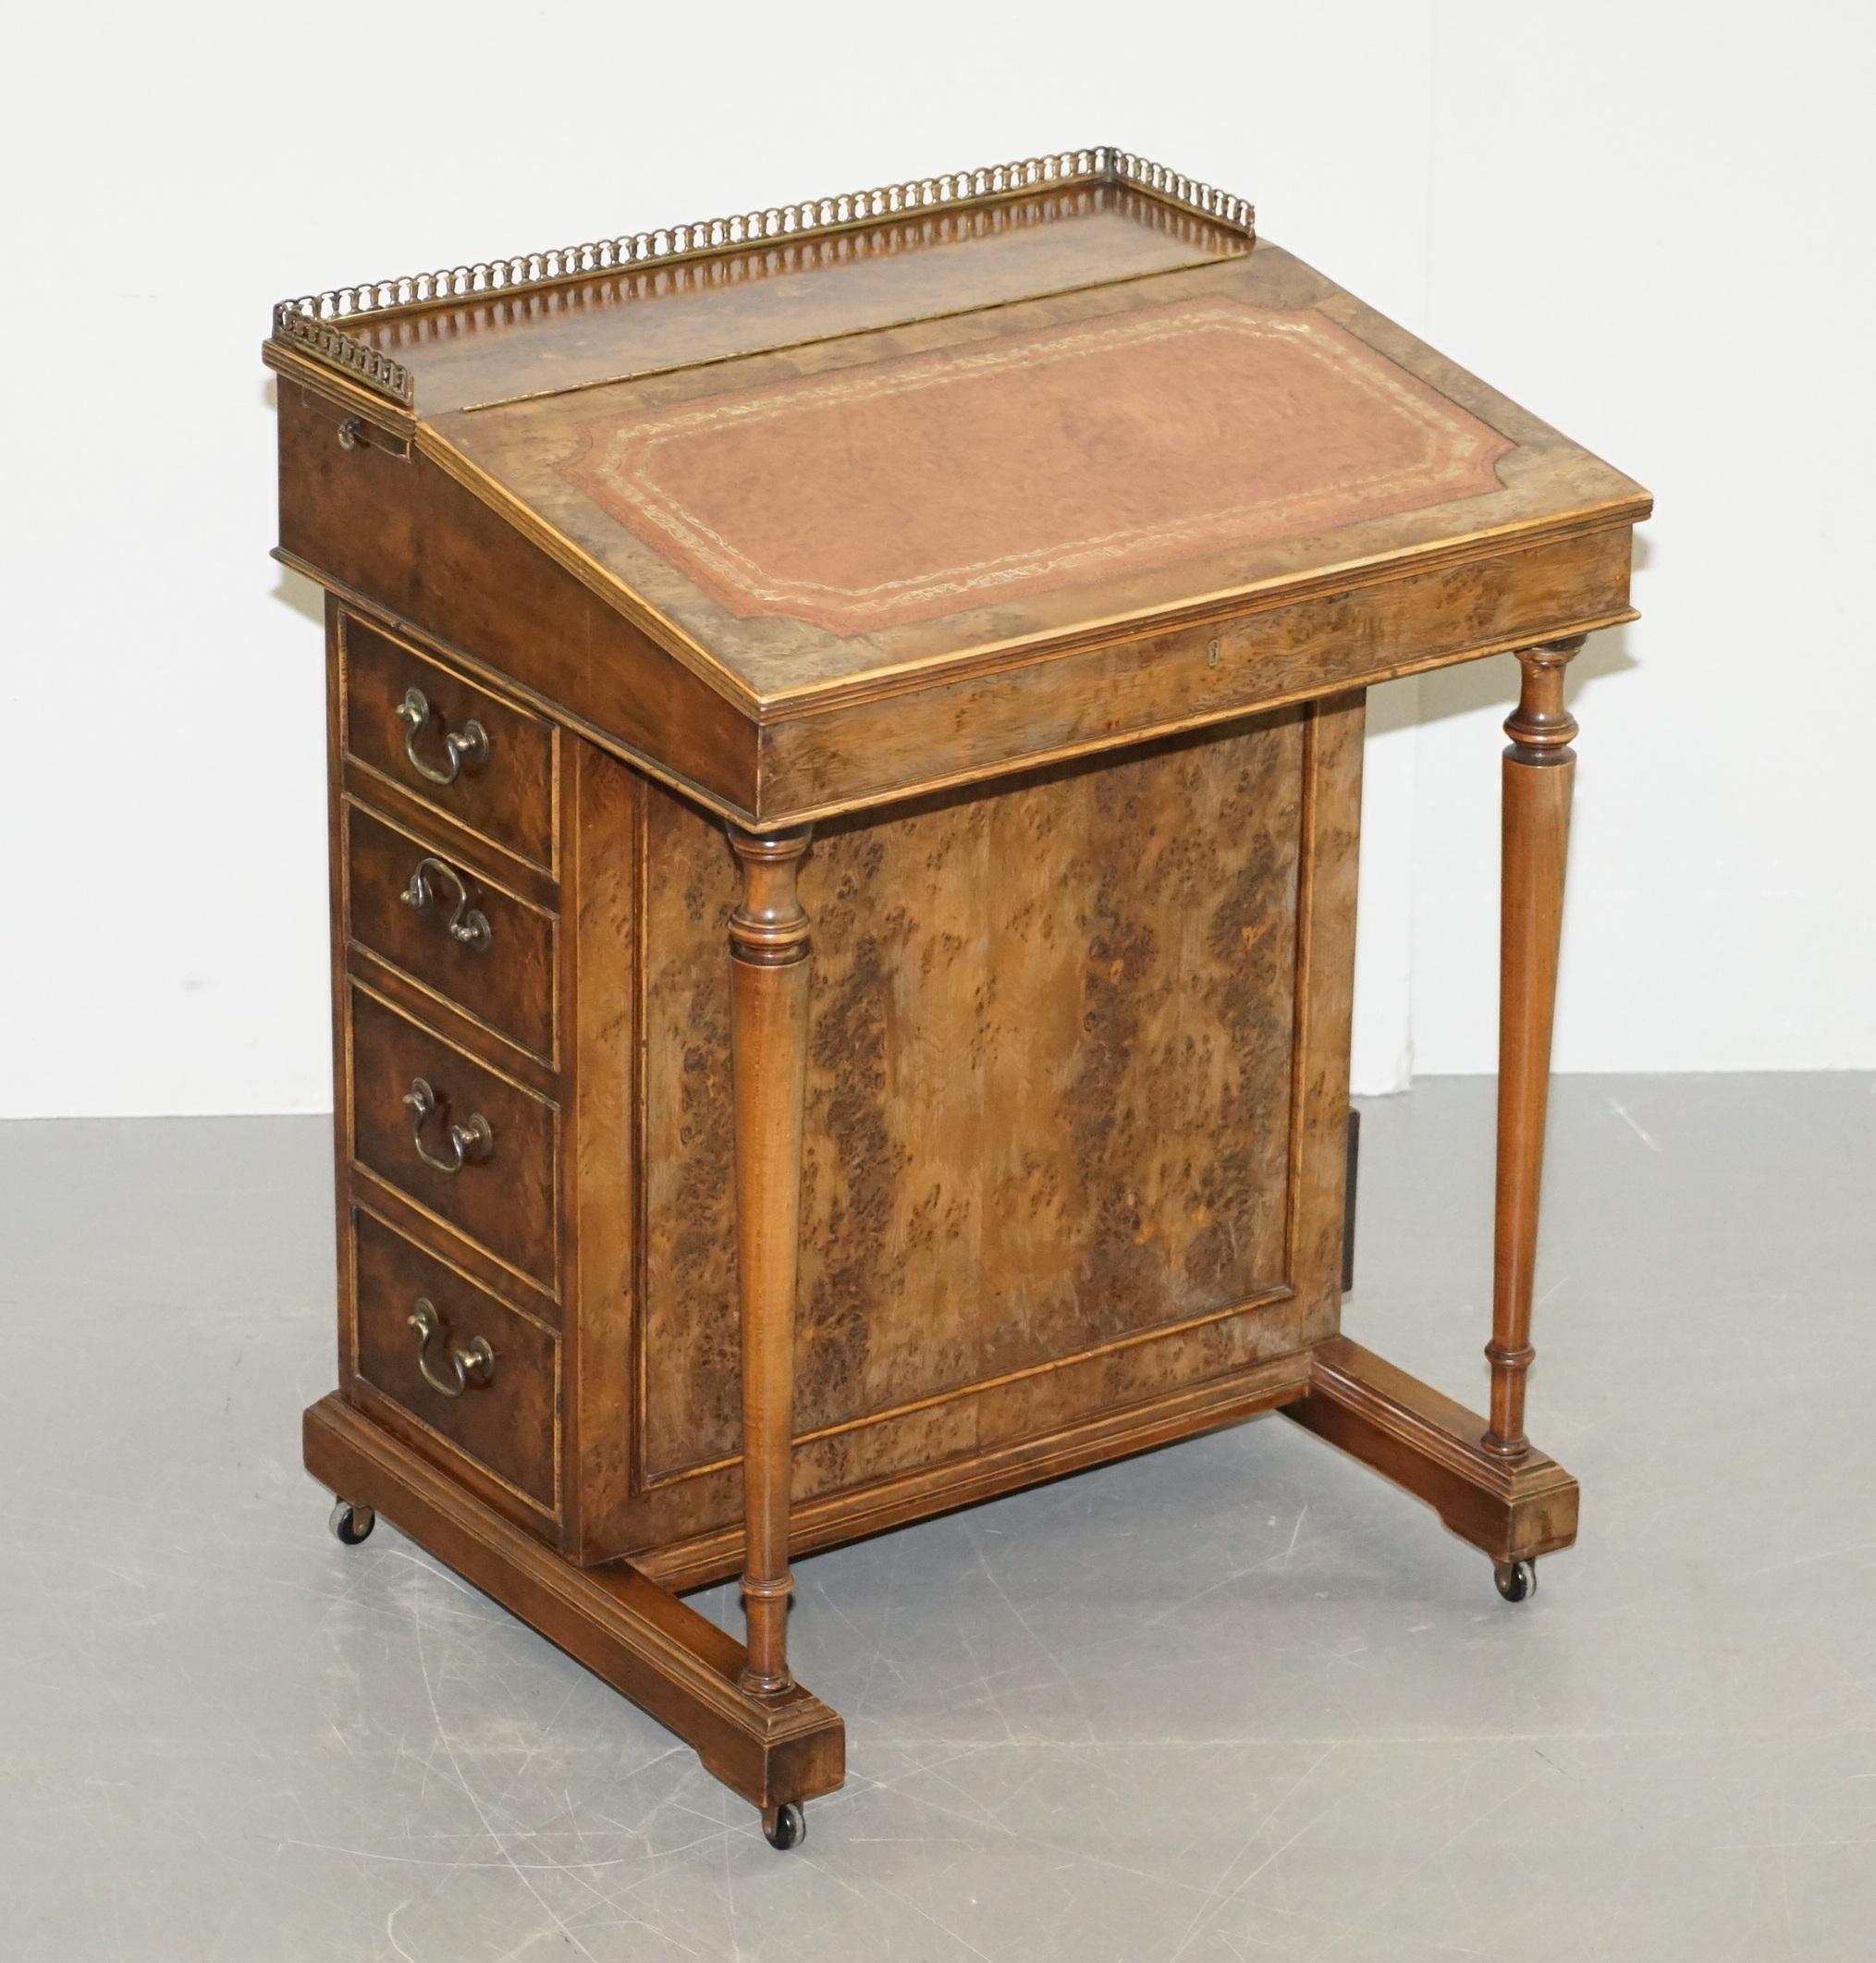 We are delighted to offer for sale this exquisite vintage burr walnut davenport desk with brown leather gold leaf tooled top and brass gallery rail.

A very well made piece, ideally suited as a laptop work station in a modern context. You have two